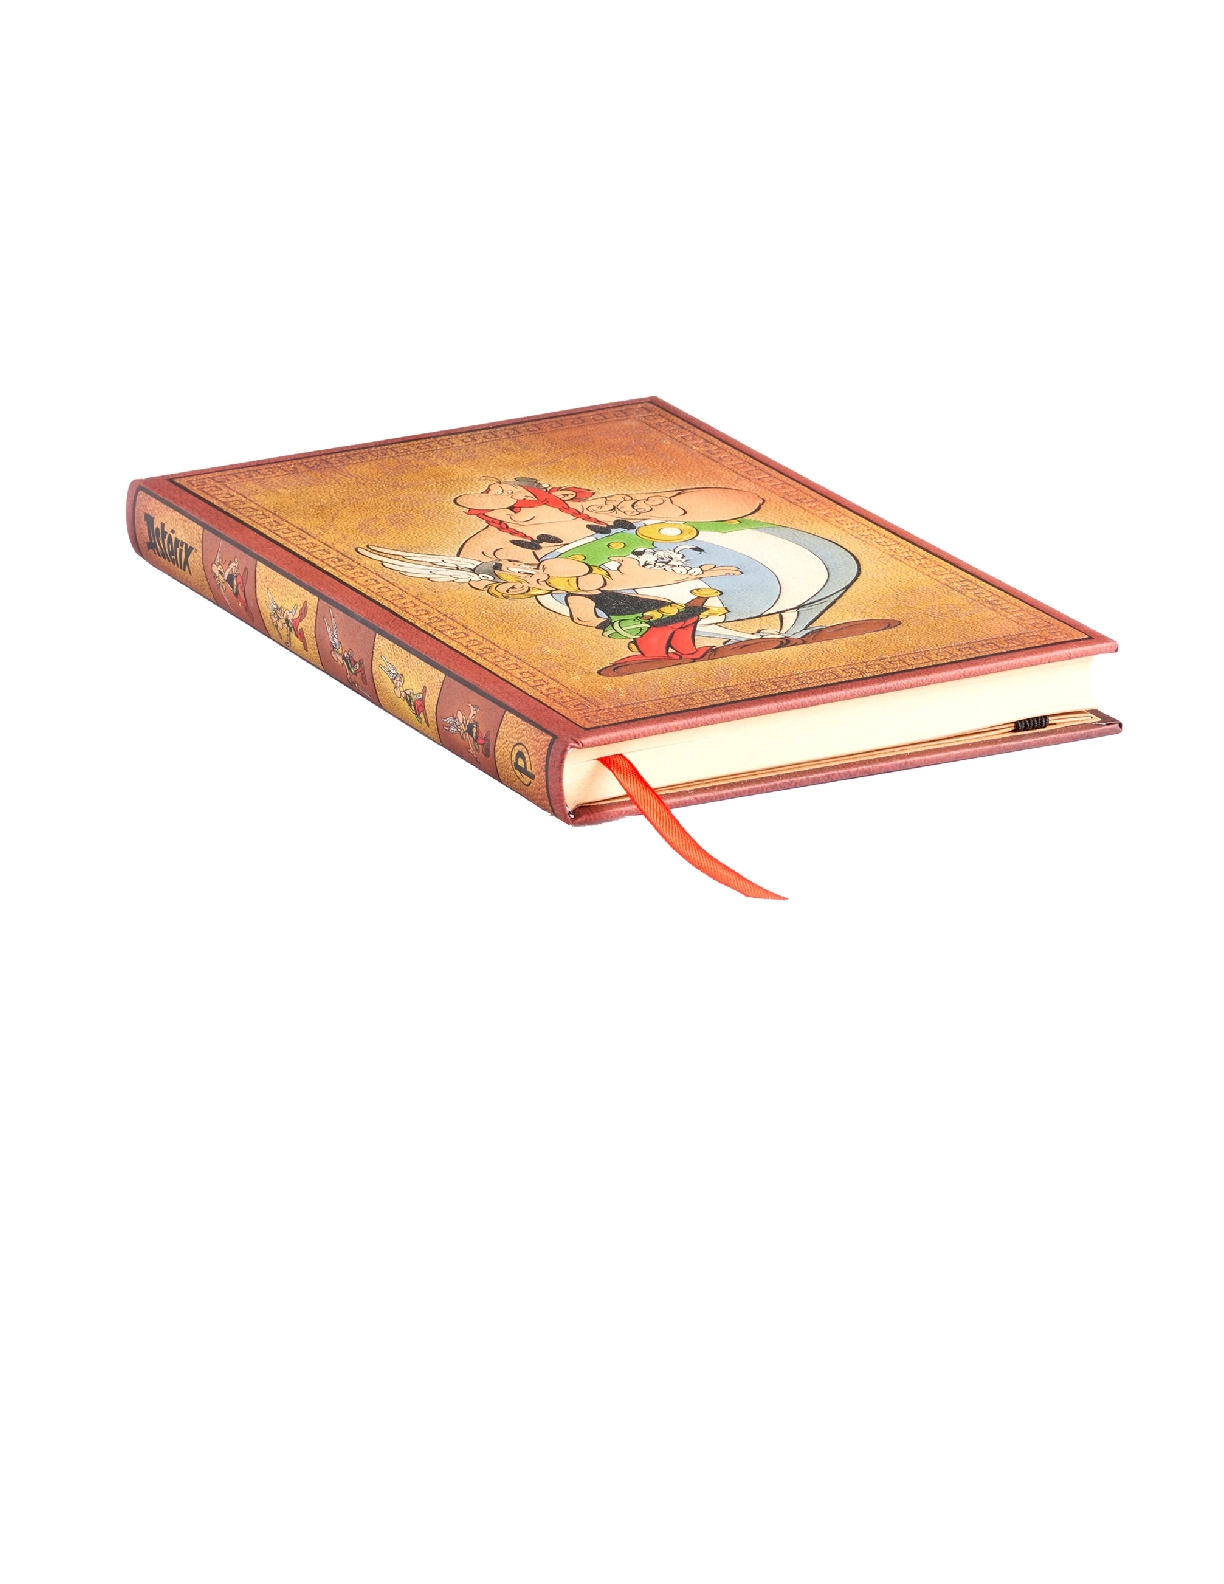 Asterix & Obelix, The Adventures of Asterix, Hardcover Journals, Midi, Lined, Elastic Band, 144 Pg, 120 GSM